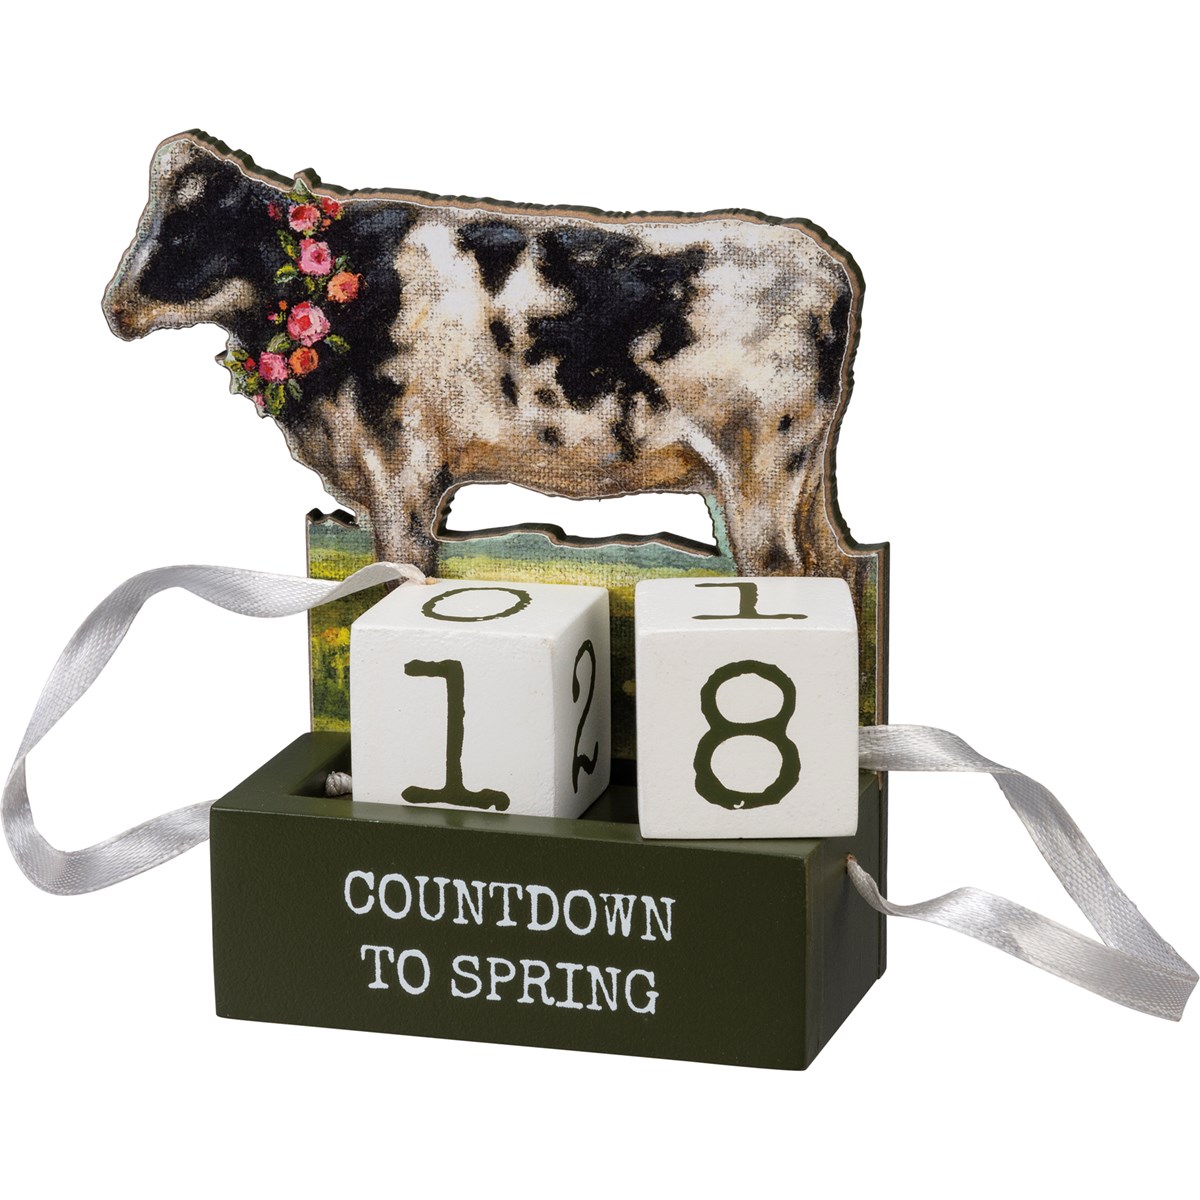 Cow Countdown To Spring Block Countdown - Wood, Paper, Ribbon